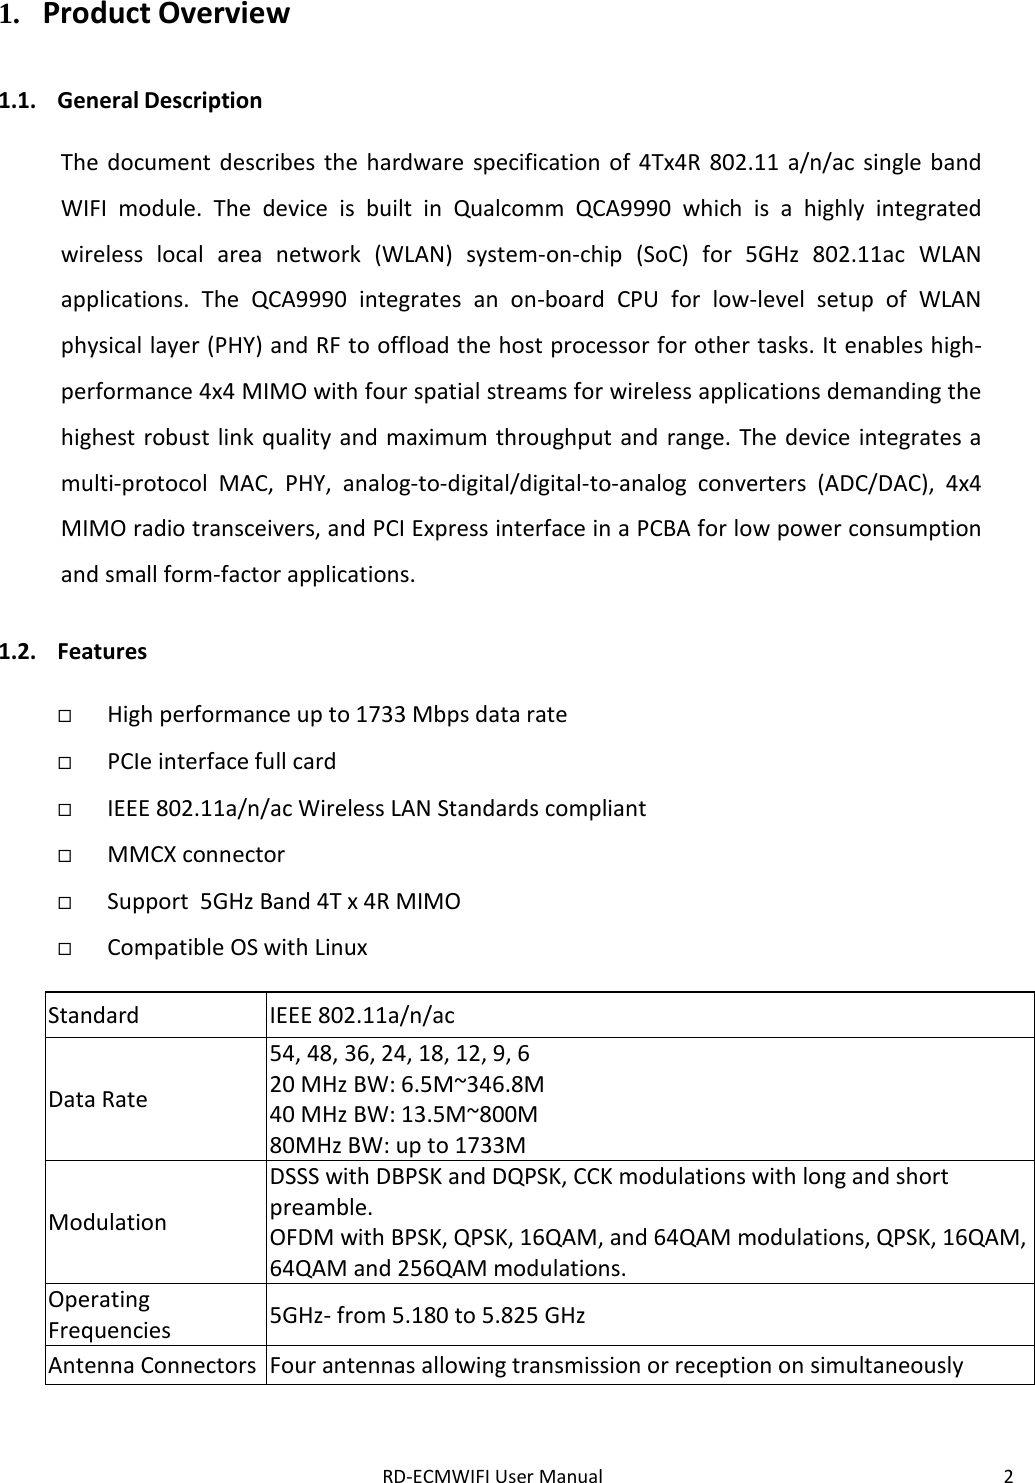 RD-ECMWIFI User Manual 2  1. Product Overview  1.1. General Description  The document describes the hardware specification of 4Tx4R 802.11 a/n/ac single band WIFI module.  The device is built in Qualcomm QCA9990 which is a highly integrated wireless local area network (WLAN) system-on-chip (SoC) for 5GHz 802.11ac WLAN applications. The QCA9990 integrates an on-board CPU for low-level setup of WLAN physical layer (PHY) and RF to offload the host processor for other tasks. It enables high-performance 4x4 MIMO with four spatial streams for wireless applications demanding the highest robust link quality and maximum throughput and range. The device integrates a multi-protocol MAC, PHY, analog-to-digital/digital-to-analog converters (ADC/DAC), 4x4 MIMO radio transceivers, and PCI Express interface in a PCBA for low power consumption and small form-factor applications.  1.2. Features   High performance up to 1733 Mbps data rate  PCIe interface full card  IEEE 802.11a/n/ac Wireless LAN Standards compliant  MMCX connector  Support  5GHz Band 4T x 4R MIMO  Compatible OS with Linux  Standard IEEE 802.11a/n/ac Data Rate 54, 48, 36, 24, 18, 12, 9, 6 20 MHz BW: 6.5M~346.8M 40 MHz BW: 13.5M~800M 80MHz BW: up to 1733M Modulation DSSS with DBPSK and DQPSK, CCK modulations with long and short preamble. OFDM with BPSK, QPSK, 16QAM, and 64QAM modulations, QPSK, 16QAM, 64QAM and 256QAM modulations. Operating Frequencies 5GHz- from 5.180 to 5.825 GHz Antenna Connectors Four antennas allowing transmission or reception on simultaneously   